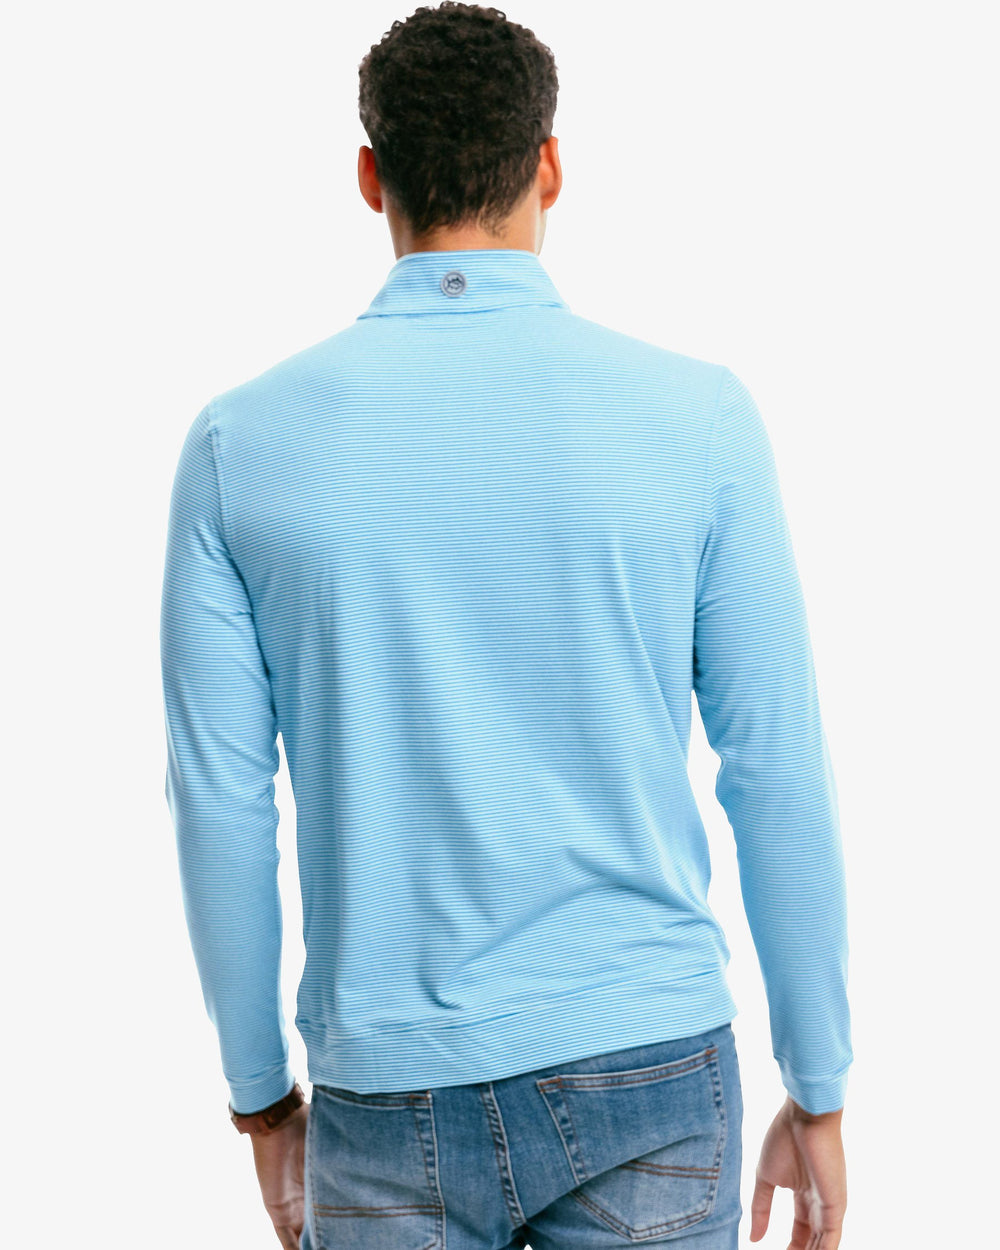 The back of the Men's Cruiser Heather Micro Striped Performance Quarter Zip Pullover by Southern Tide - Heather Blue Sapphire